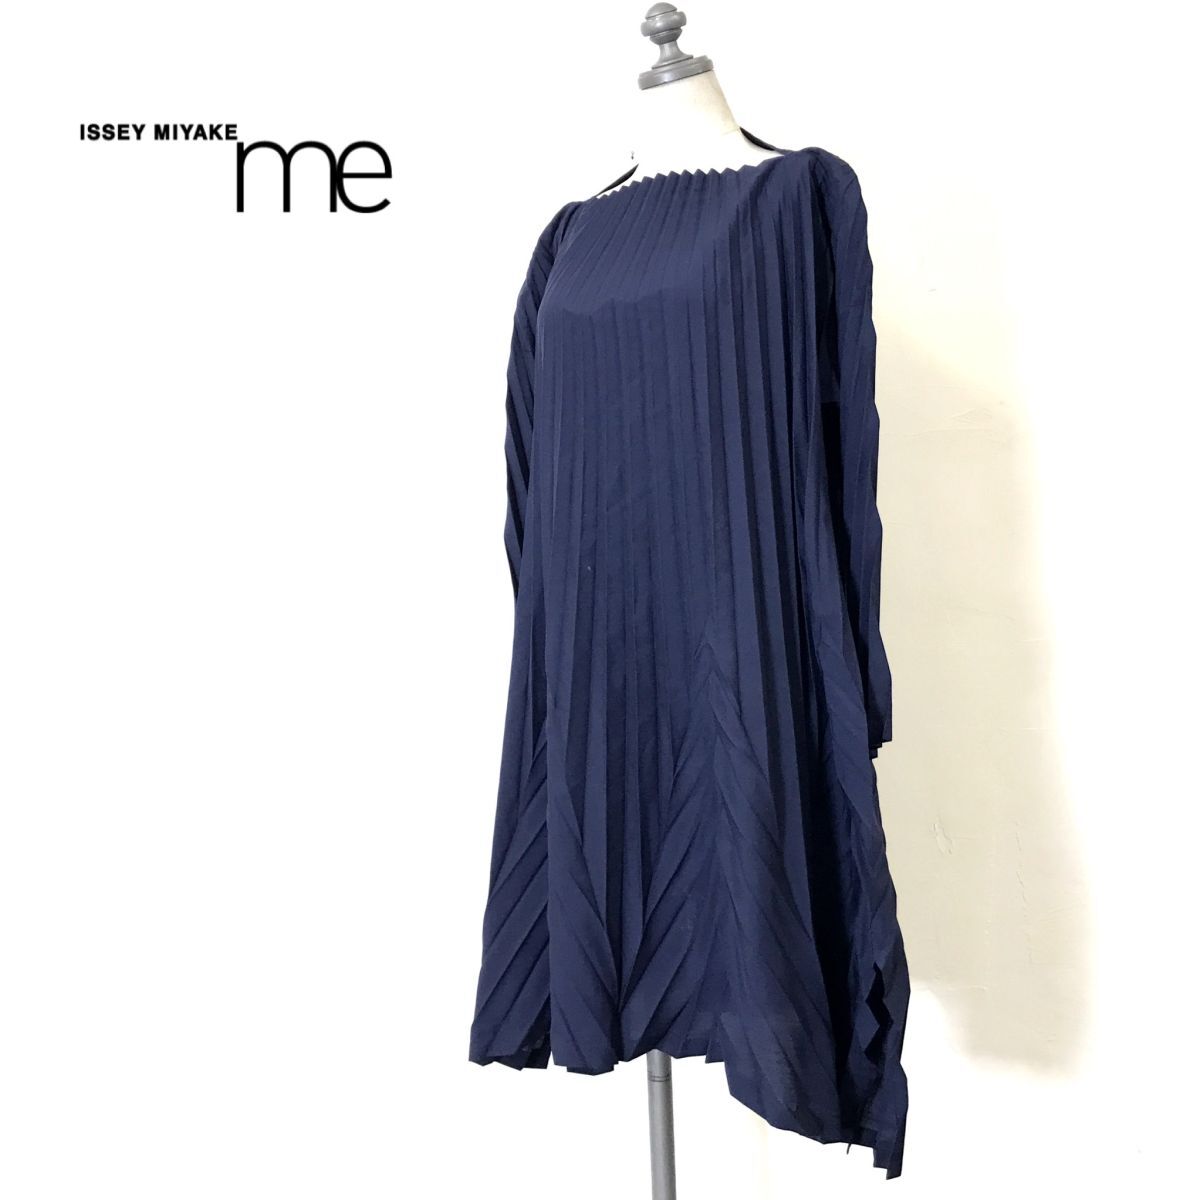 G896-D* superior article * me ISSEY MIYAKEmi- Issey Miyake pleat One-piece long design long sleeve thin through year *sizeF navy polyester 